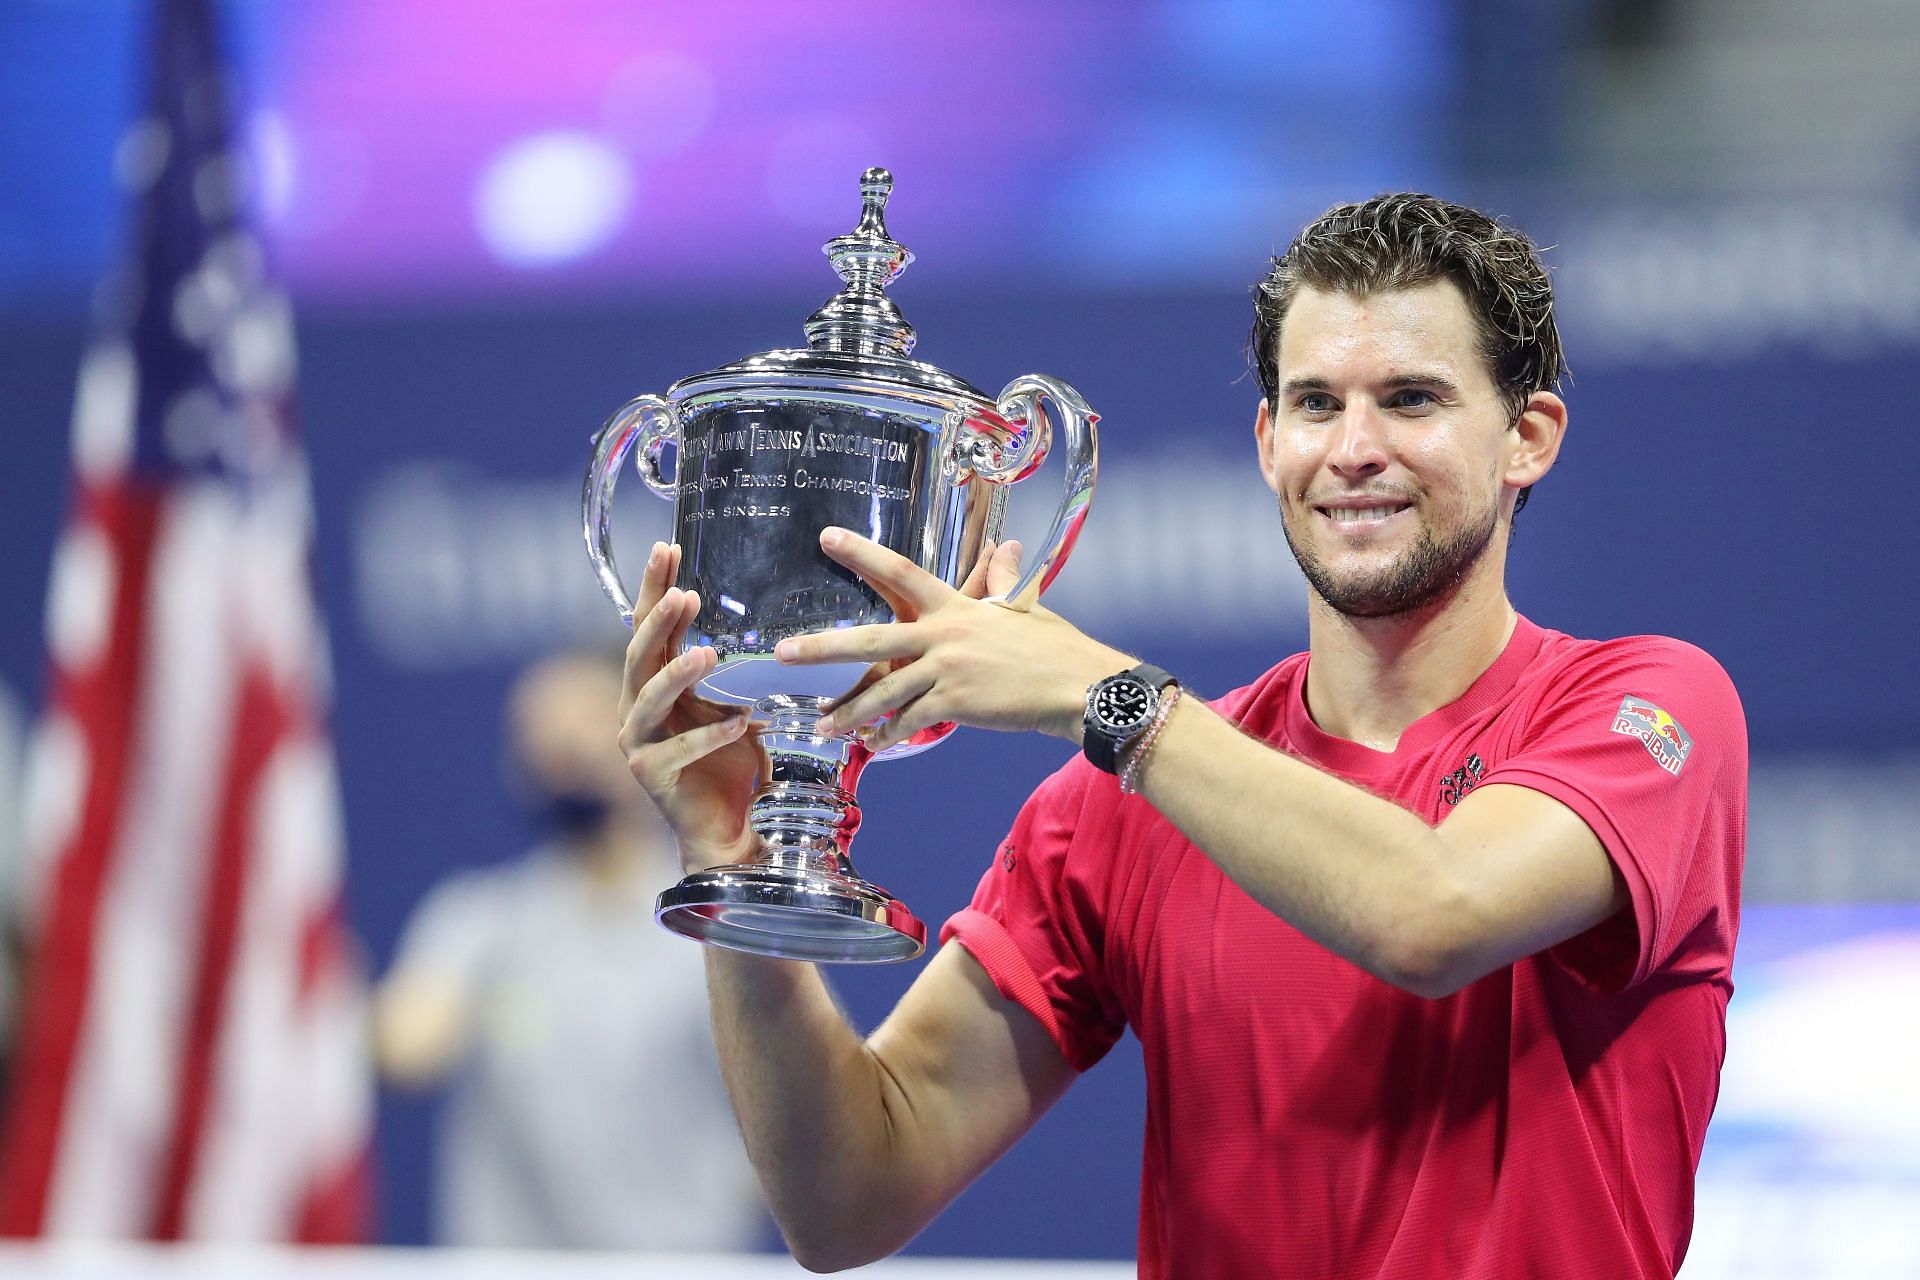 Dominic Thiem, with his 2020 US Open